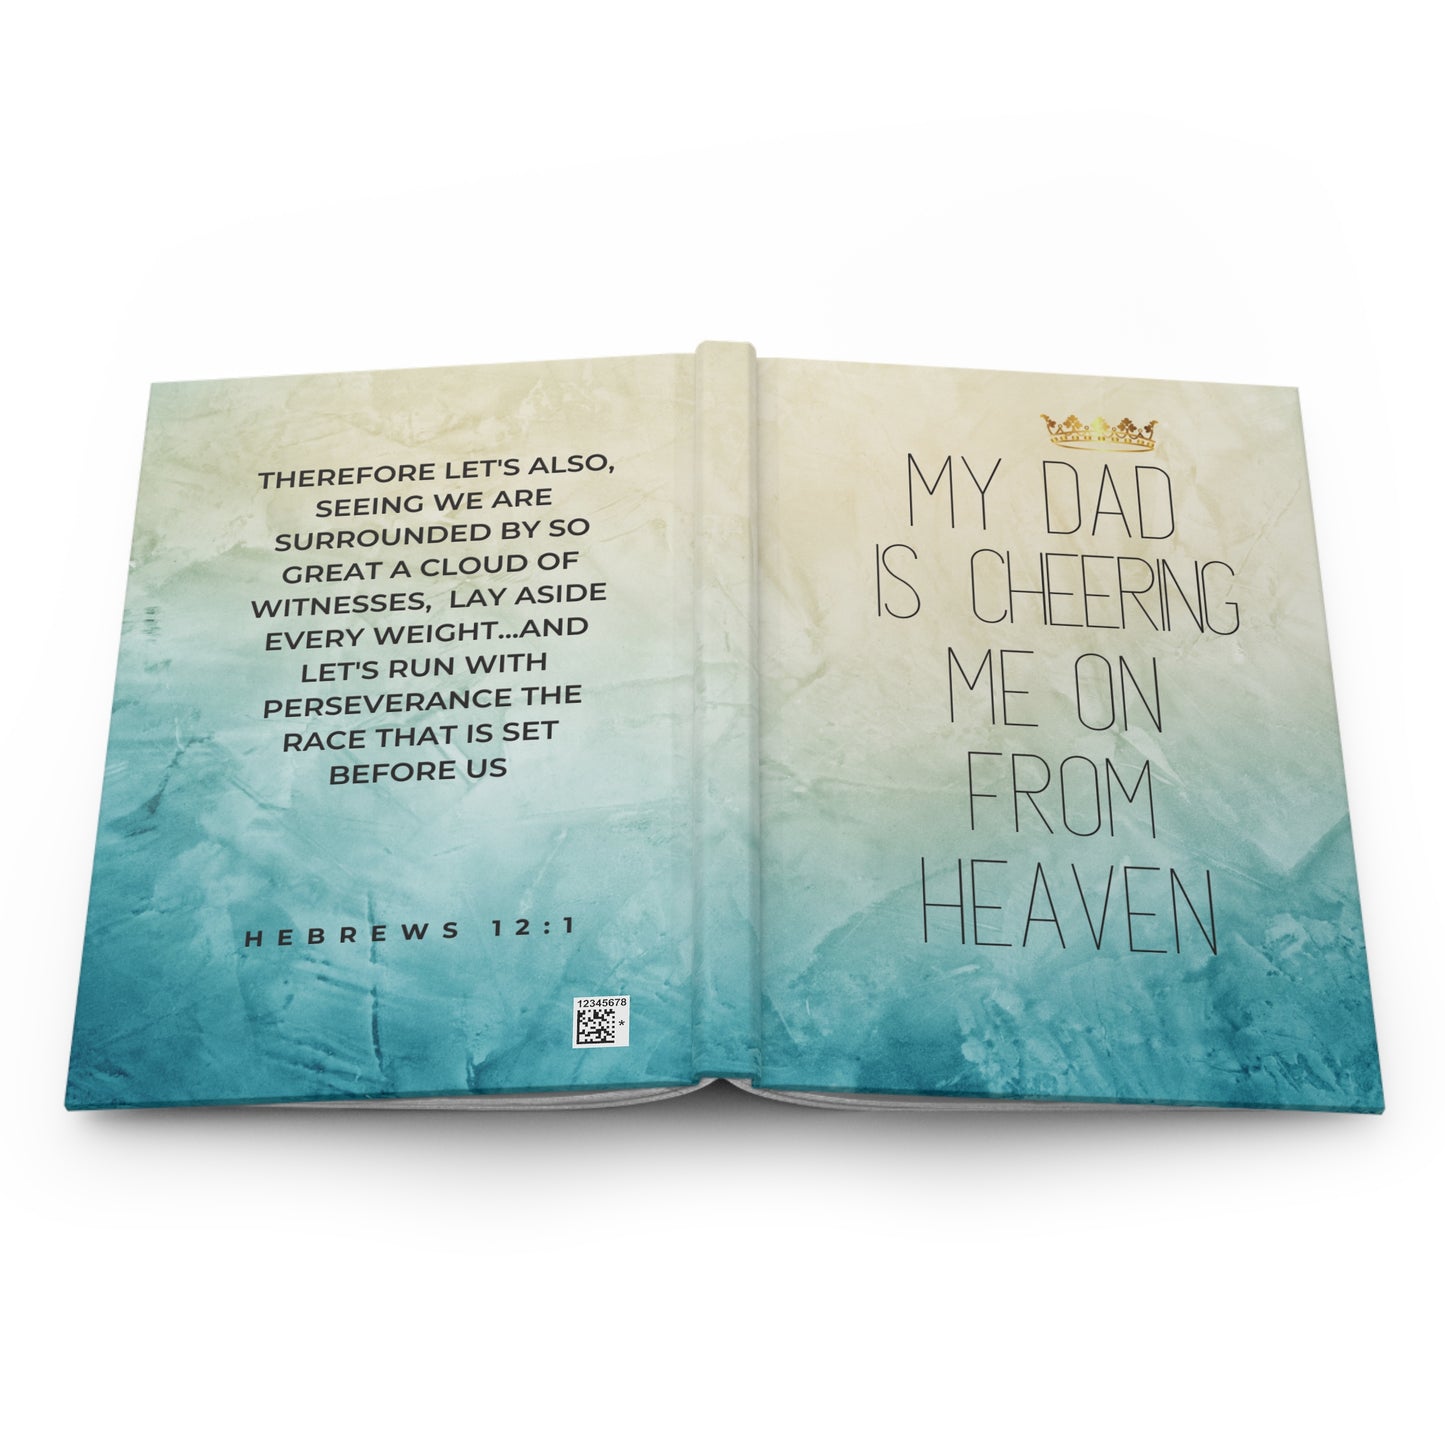 Grief Journal for Loss of Father, Cheering Me On From Heaven